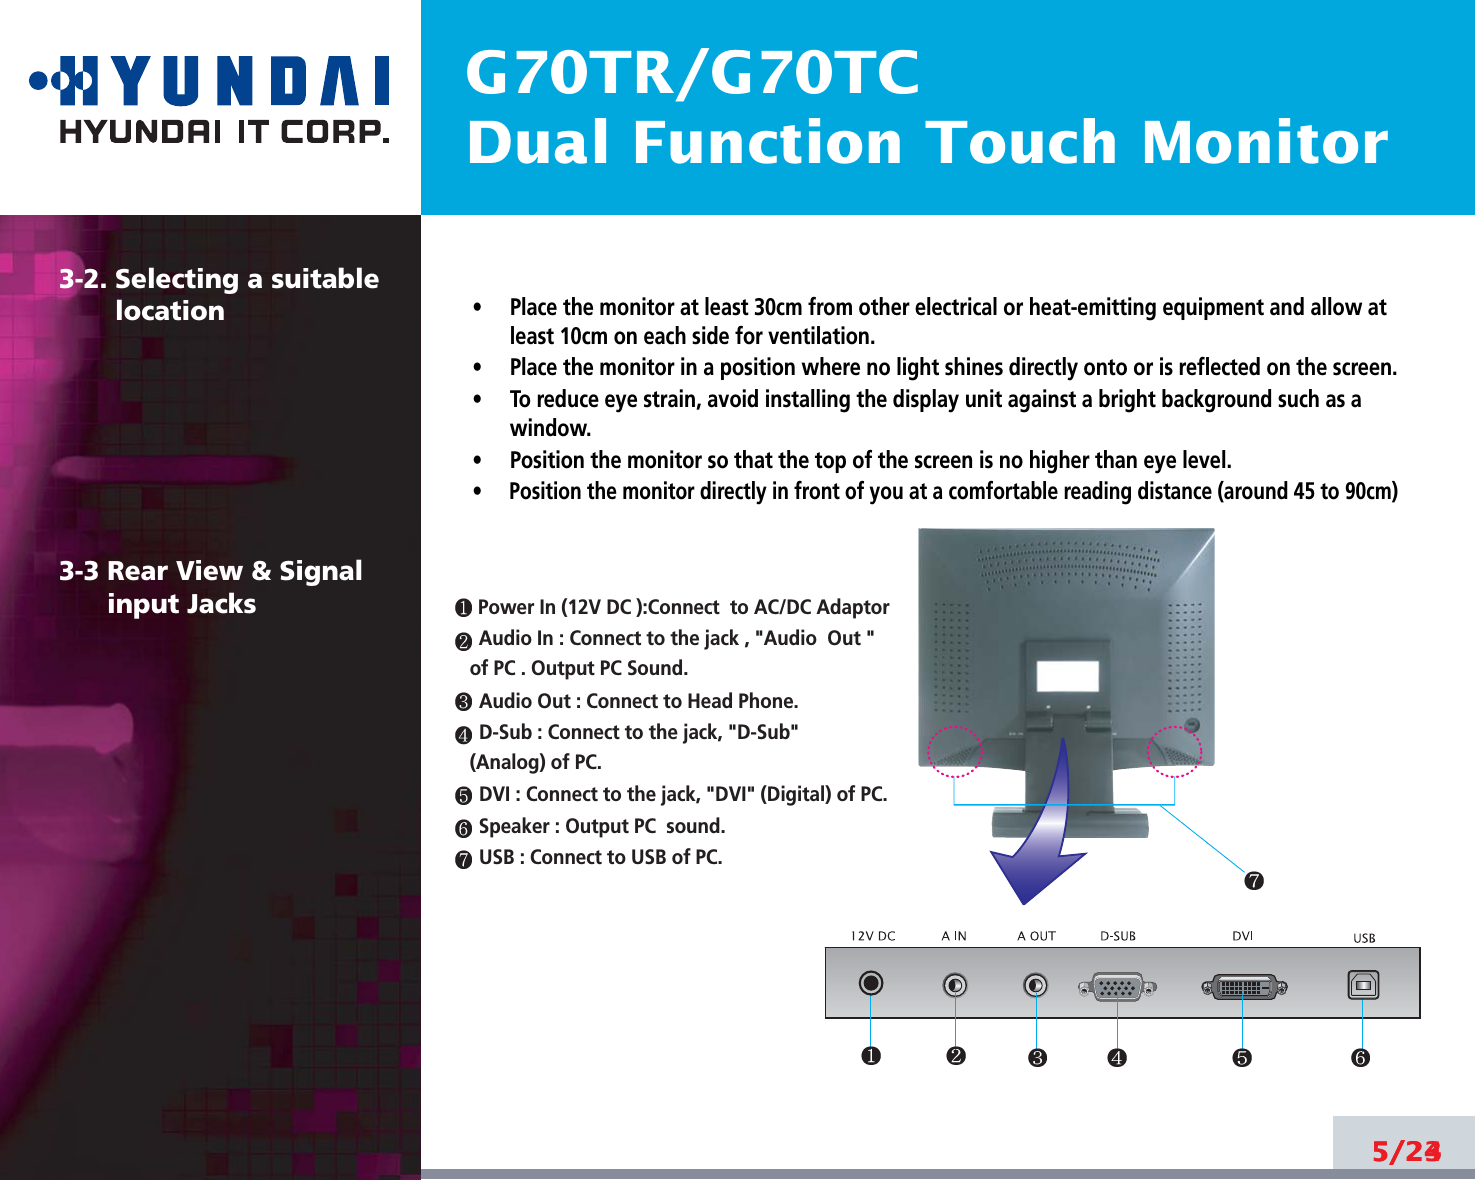 G70TR/G70TCDual Function Touch Monitor5/245/233-2. Selecting a suitablelocation3-3 Rear View &amp; Signalinput Jacks•     Place the monitor at least 30cm from other electrical or heat-emitting equipment and allow atleast 10cm on each side for ventilation.•     Place the monitor in a position where no light shines directly onto or is reflected on the screen.•     To reduce eye strain, avoid installing the display unit against a bright background such as awindow.•     Position the monitor so that the top of the screen is no higher than eye level.•   Position the monitor directly in front of you at a comfortable reading distance (around 45 to 90cm) Power In (12V DC ):Connect to AC/DC AdaptorAudio In : Connect to the jack , &quot;Audio  Out &quot; of PC . Output PC Sound.Audio Out : Connect to Head Phone.D-Sub : Connect to the jack, &quot;D-Sub&quot; (Analog) of PC.DVI : Connect to the jack, &quot;DVI&quot; (Digital) of PC.Speaker : Output PC  sound.USB : Connect to USB of PC.